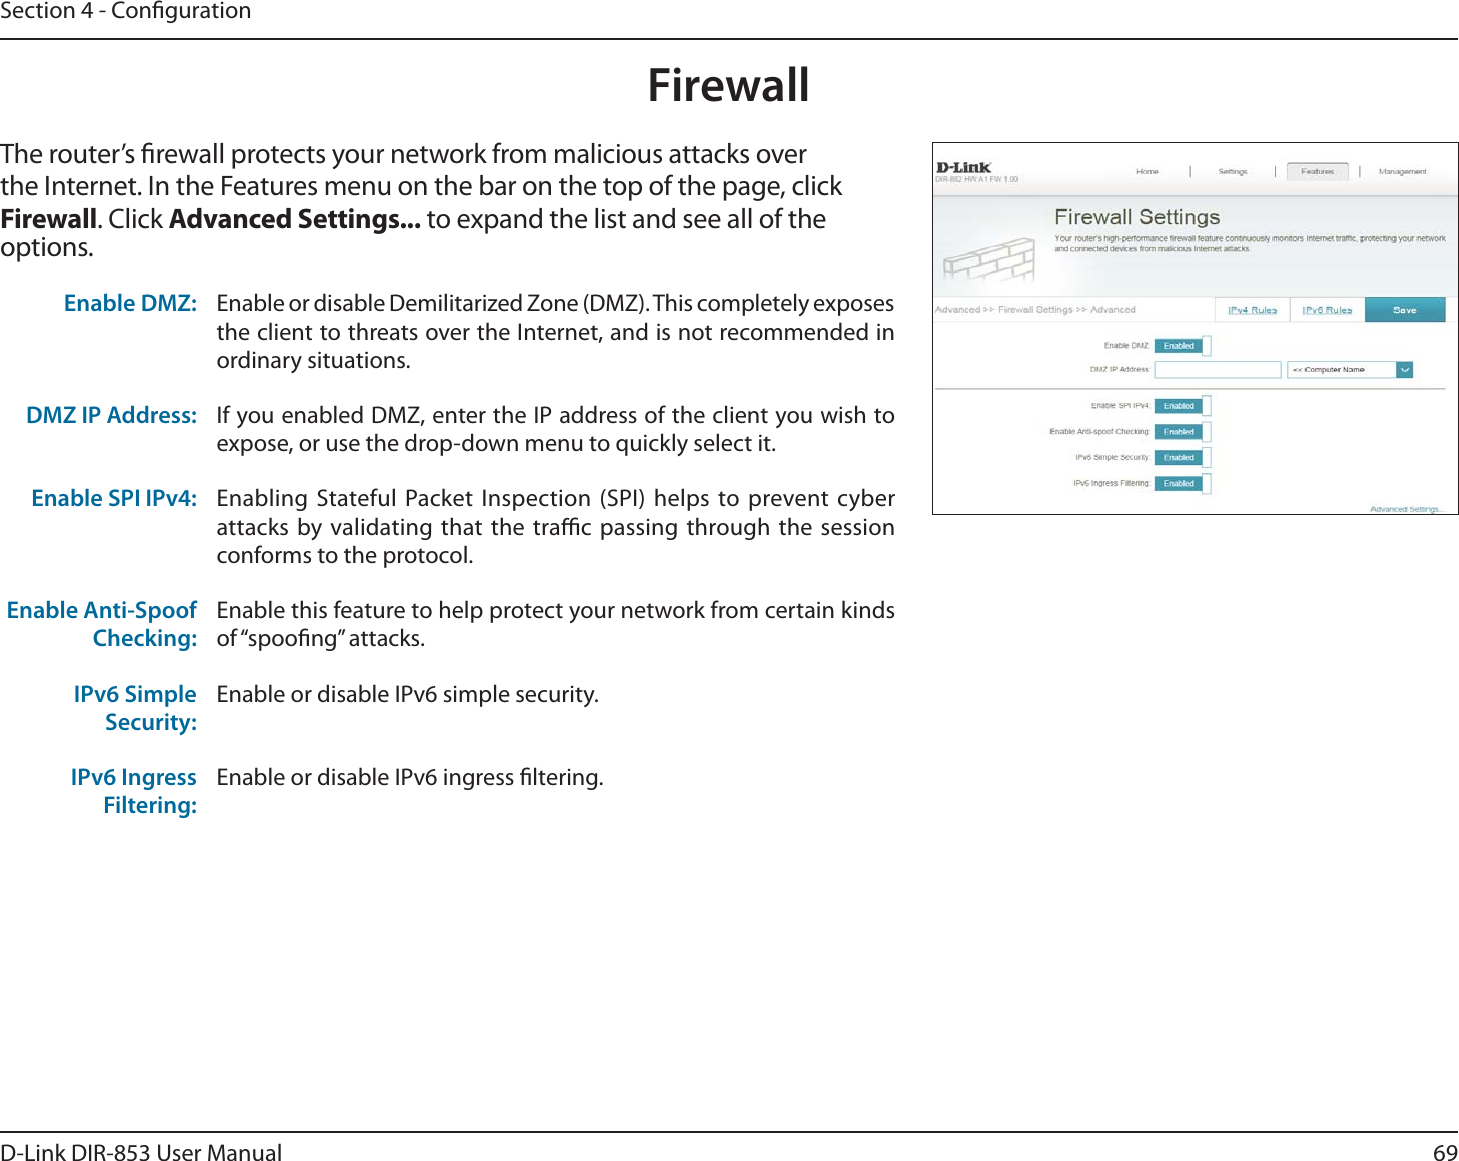 69D-Link DIR-853 User ManualSection 4 - CongurationFirewallThe router’s rewall protects your network from malicious attacks over the Internet. In the Features menu on the bar on the top of the page, click Firewall. Click Advanced Settings... to expand the list and see all of the options. Enable DMZ: Enable or disable Demilitarized Zone (DMZ). This completely exposes the client to threats over the Internet, and is not recommended in ordinary situations.DMZ IP Address: If you enabled DMZ, enter the IP address of the client you wish to expose, or use the drop-down menu to quickly select it.Enable SPI IPv4: Enabling Stateful Packet Inspection (SPI) helps to prevent cyber attacks by validating that the trac passing through the session conforms to the protocol.Enable Anti-Spoof Checking:Enable this feature to help protect your network from certain kinds of “spoong” attacks.IPv6 Simple Security:Enable or disable IPv6 simple security.IPv6 Ingress Filtering:Enable or disable IPv6 ingress ltering.